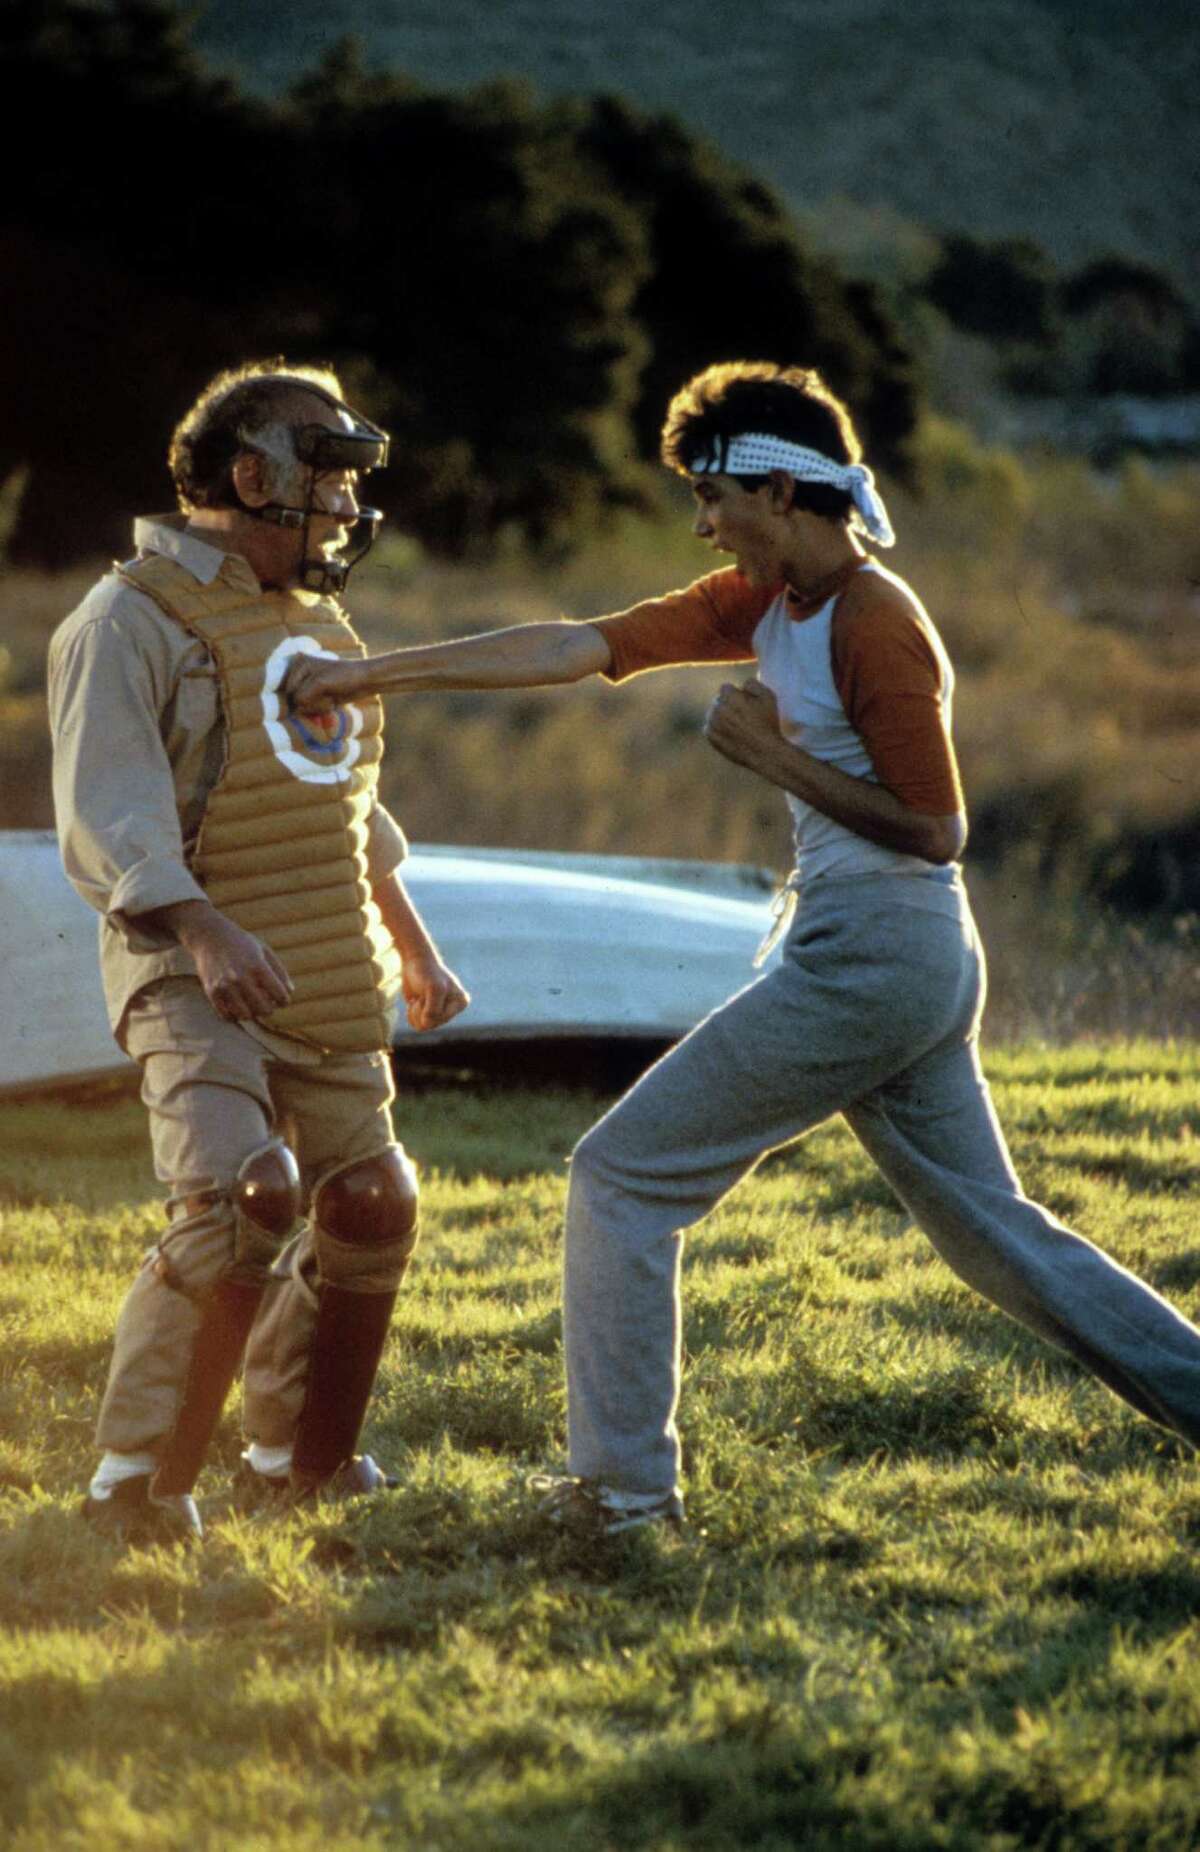 We were so amped up about "Top Gun" Day and "Ghostbusters" turning 30 that we almost forgot to celebrate another classic '80s film celebrating an anniversary: "The Karate Kid."Having premiered 30 years ago in June, "The Karate Kid" remains and American pop culture mainstay, with Miyagi's wise lessons ("Wax on, wax off"), the "crane" kick, and the Cobra Kai ("No mercy!").So trim your bonsai tree, crush some house flies with your chopsticks and fire up Bananarama's "Cruel Summer" and relive the movie that made you and your friends want to learn karate, despite your mother's objections.